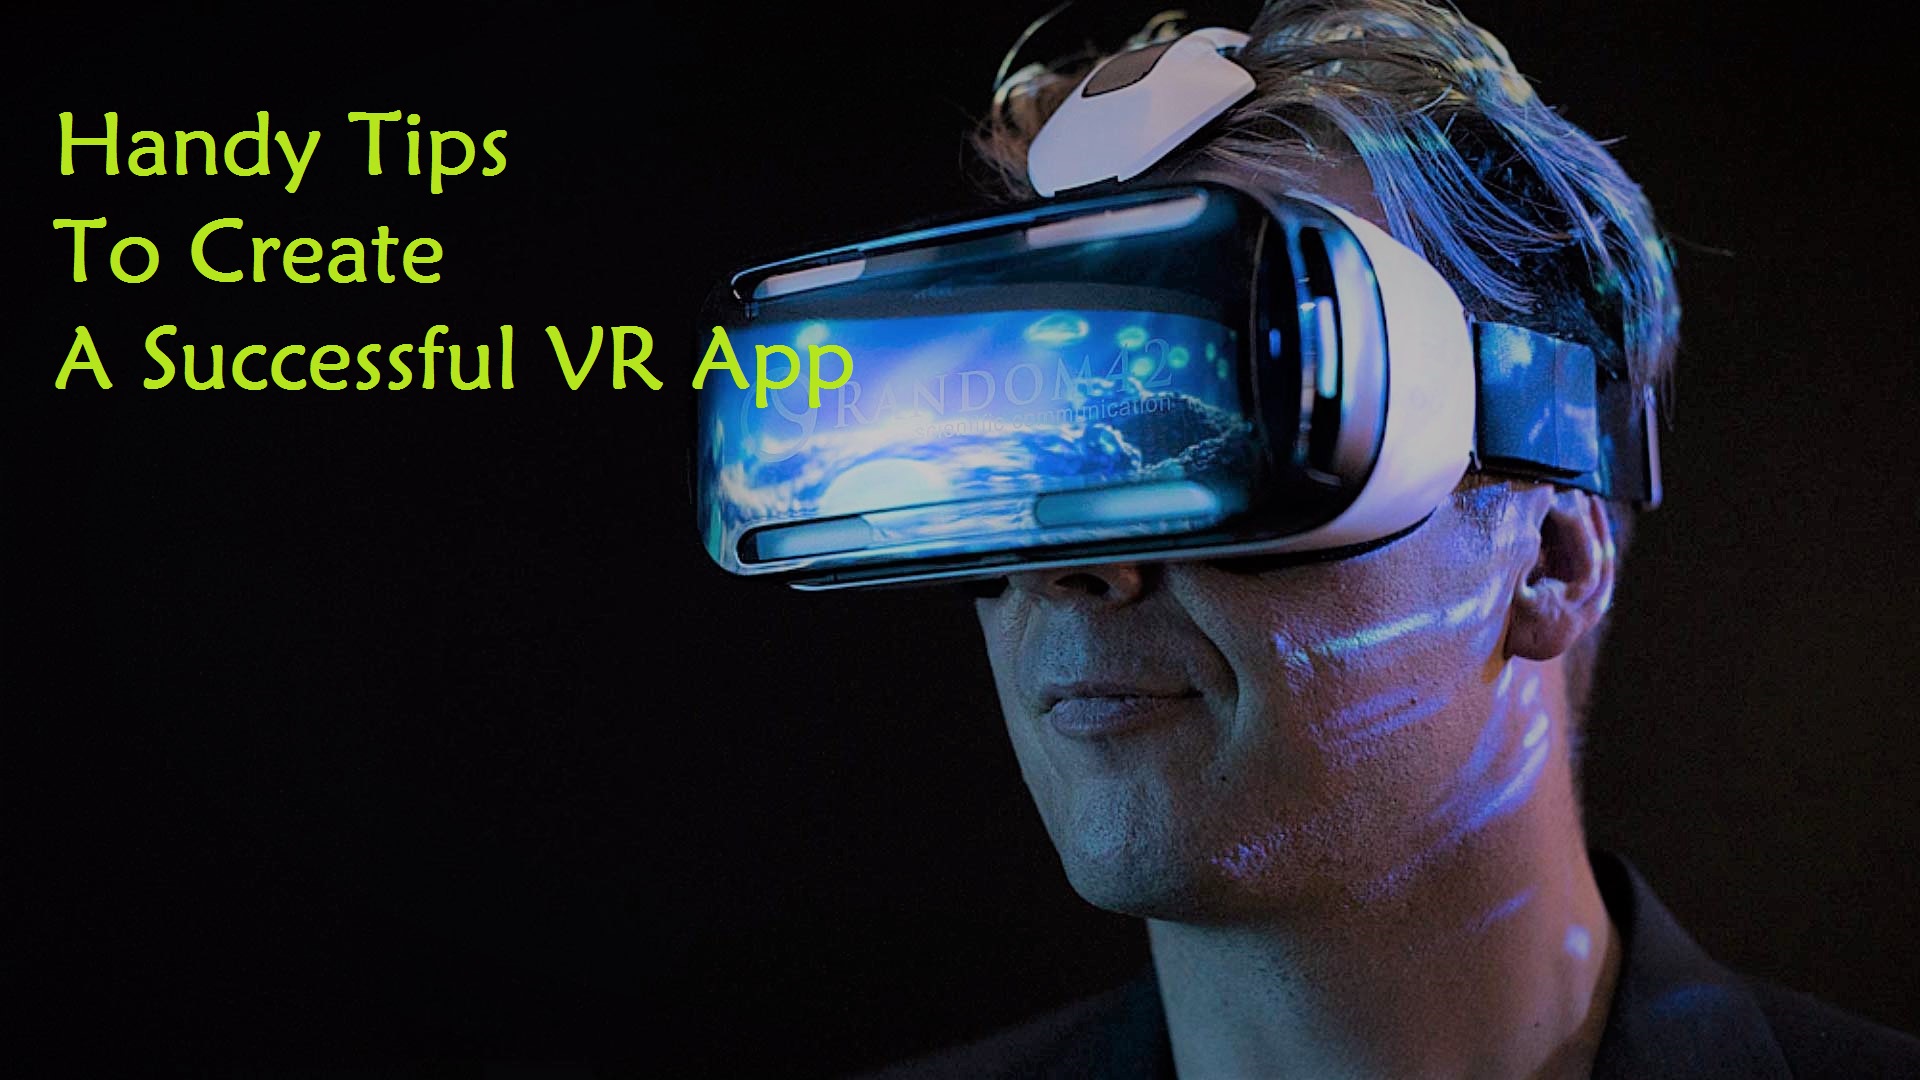 Handy tips to create a successful VR app